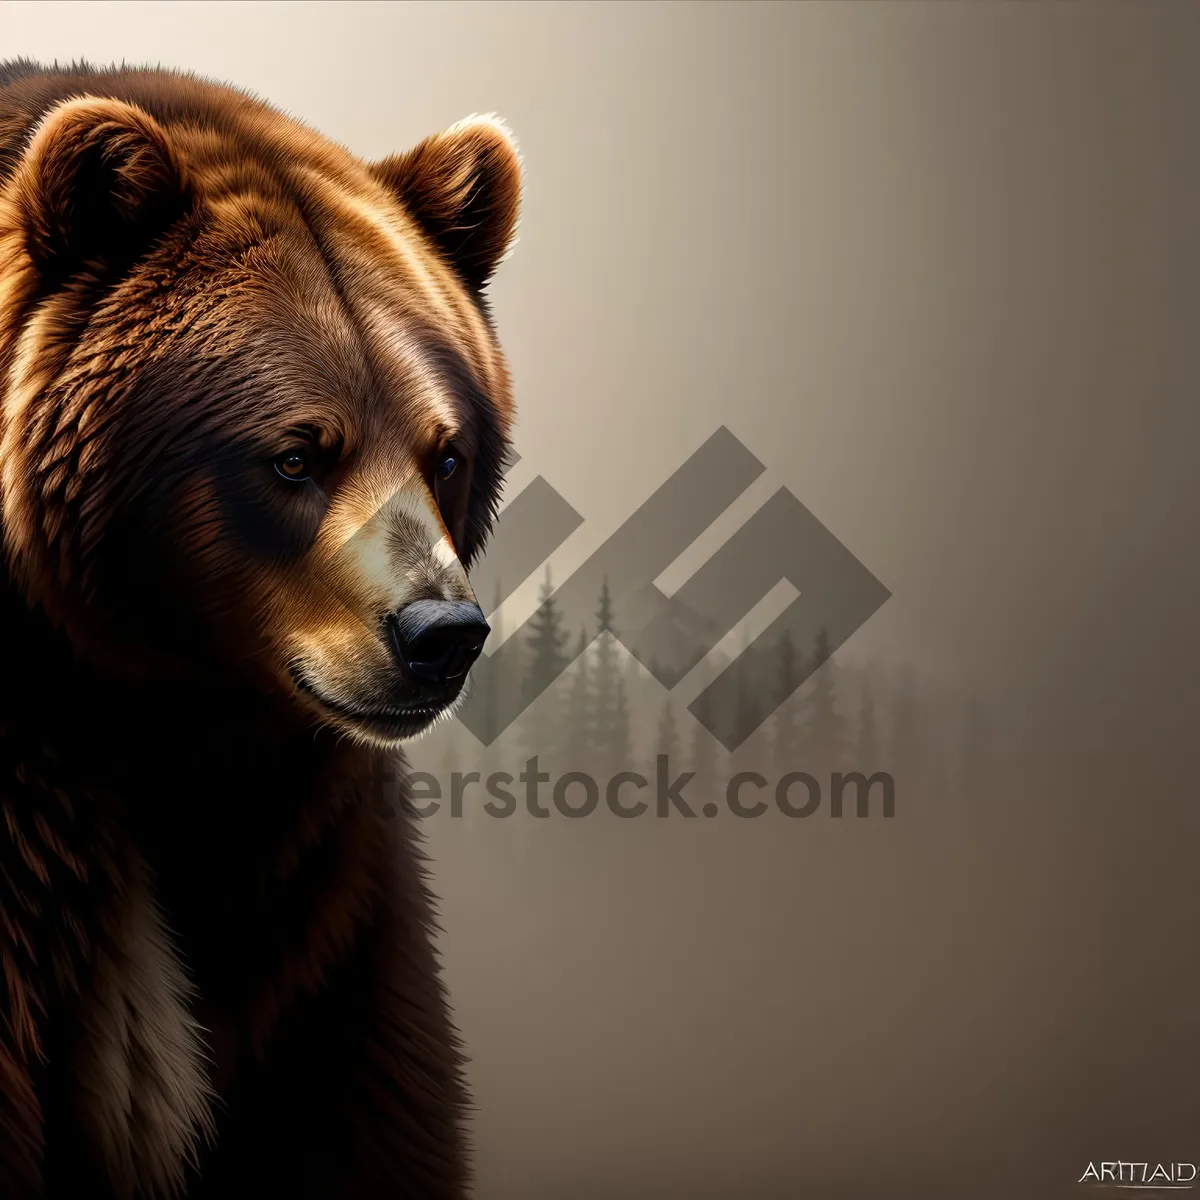 Picture of Furry Predator: Brown Bear in Zoo